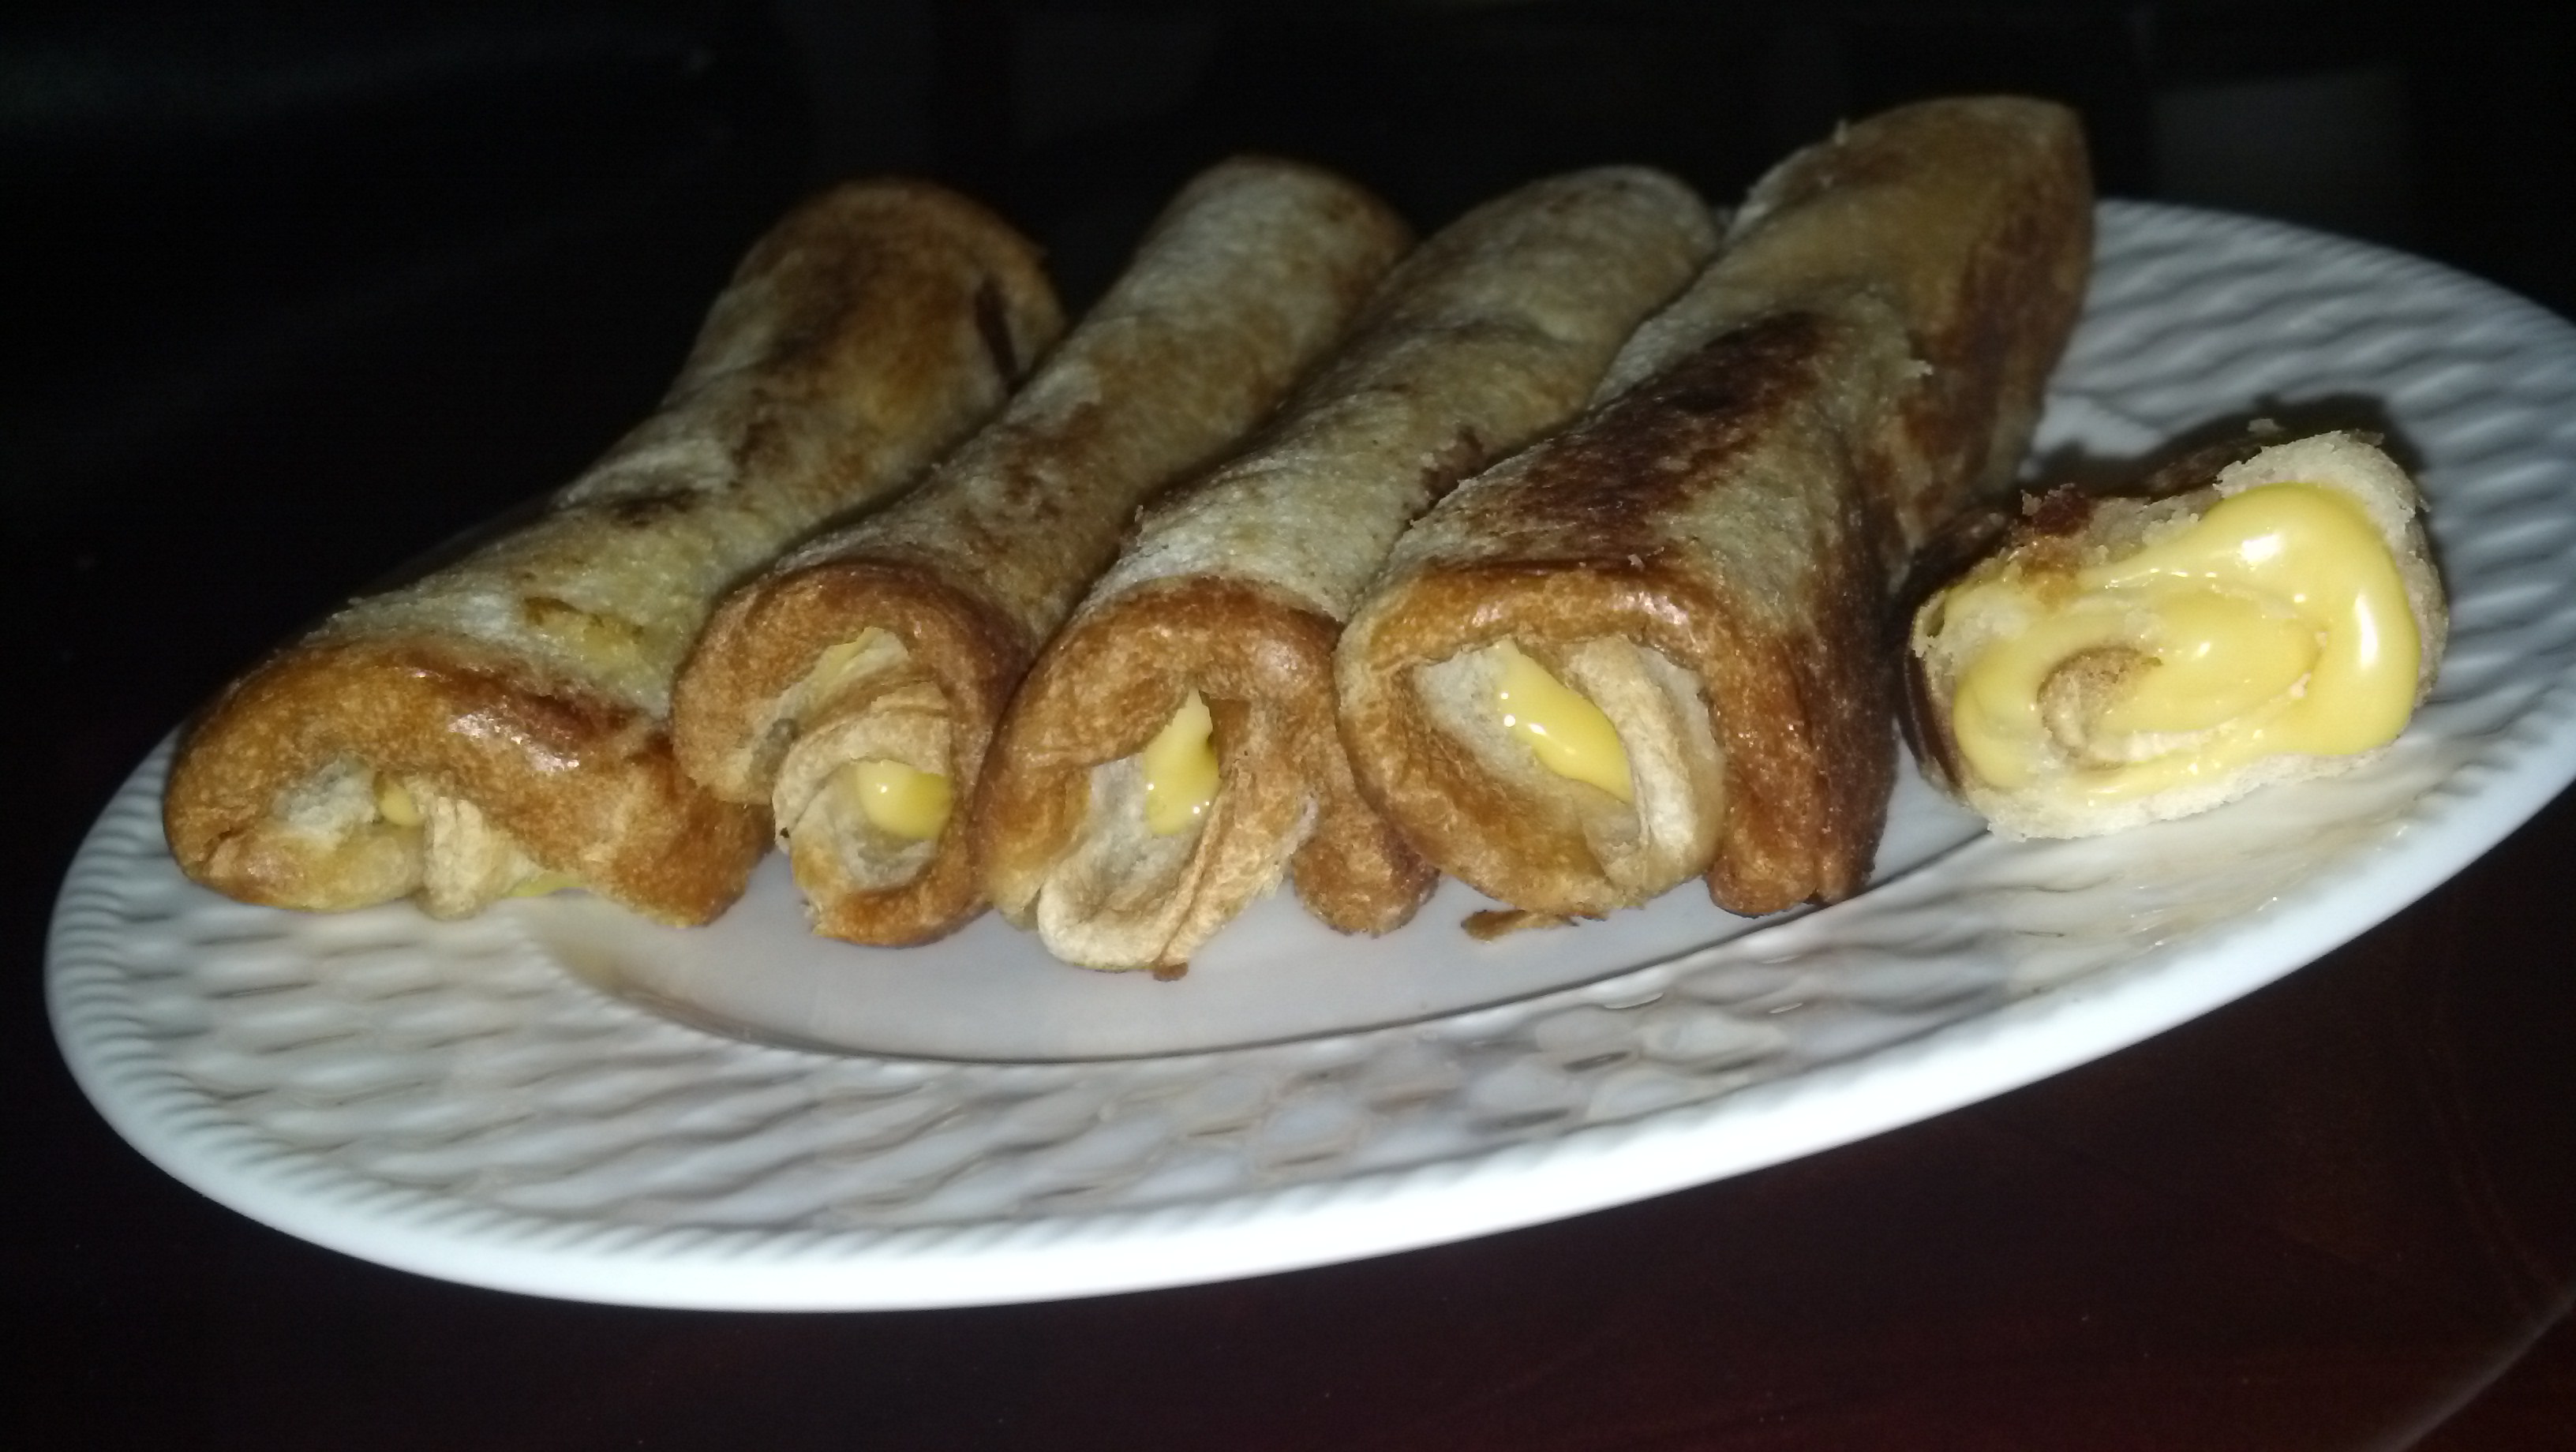 Sauteed rolled white bread with American cheese